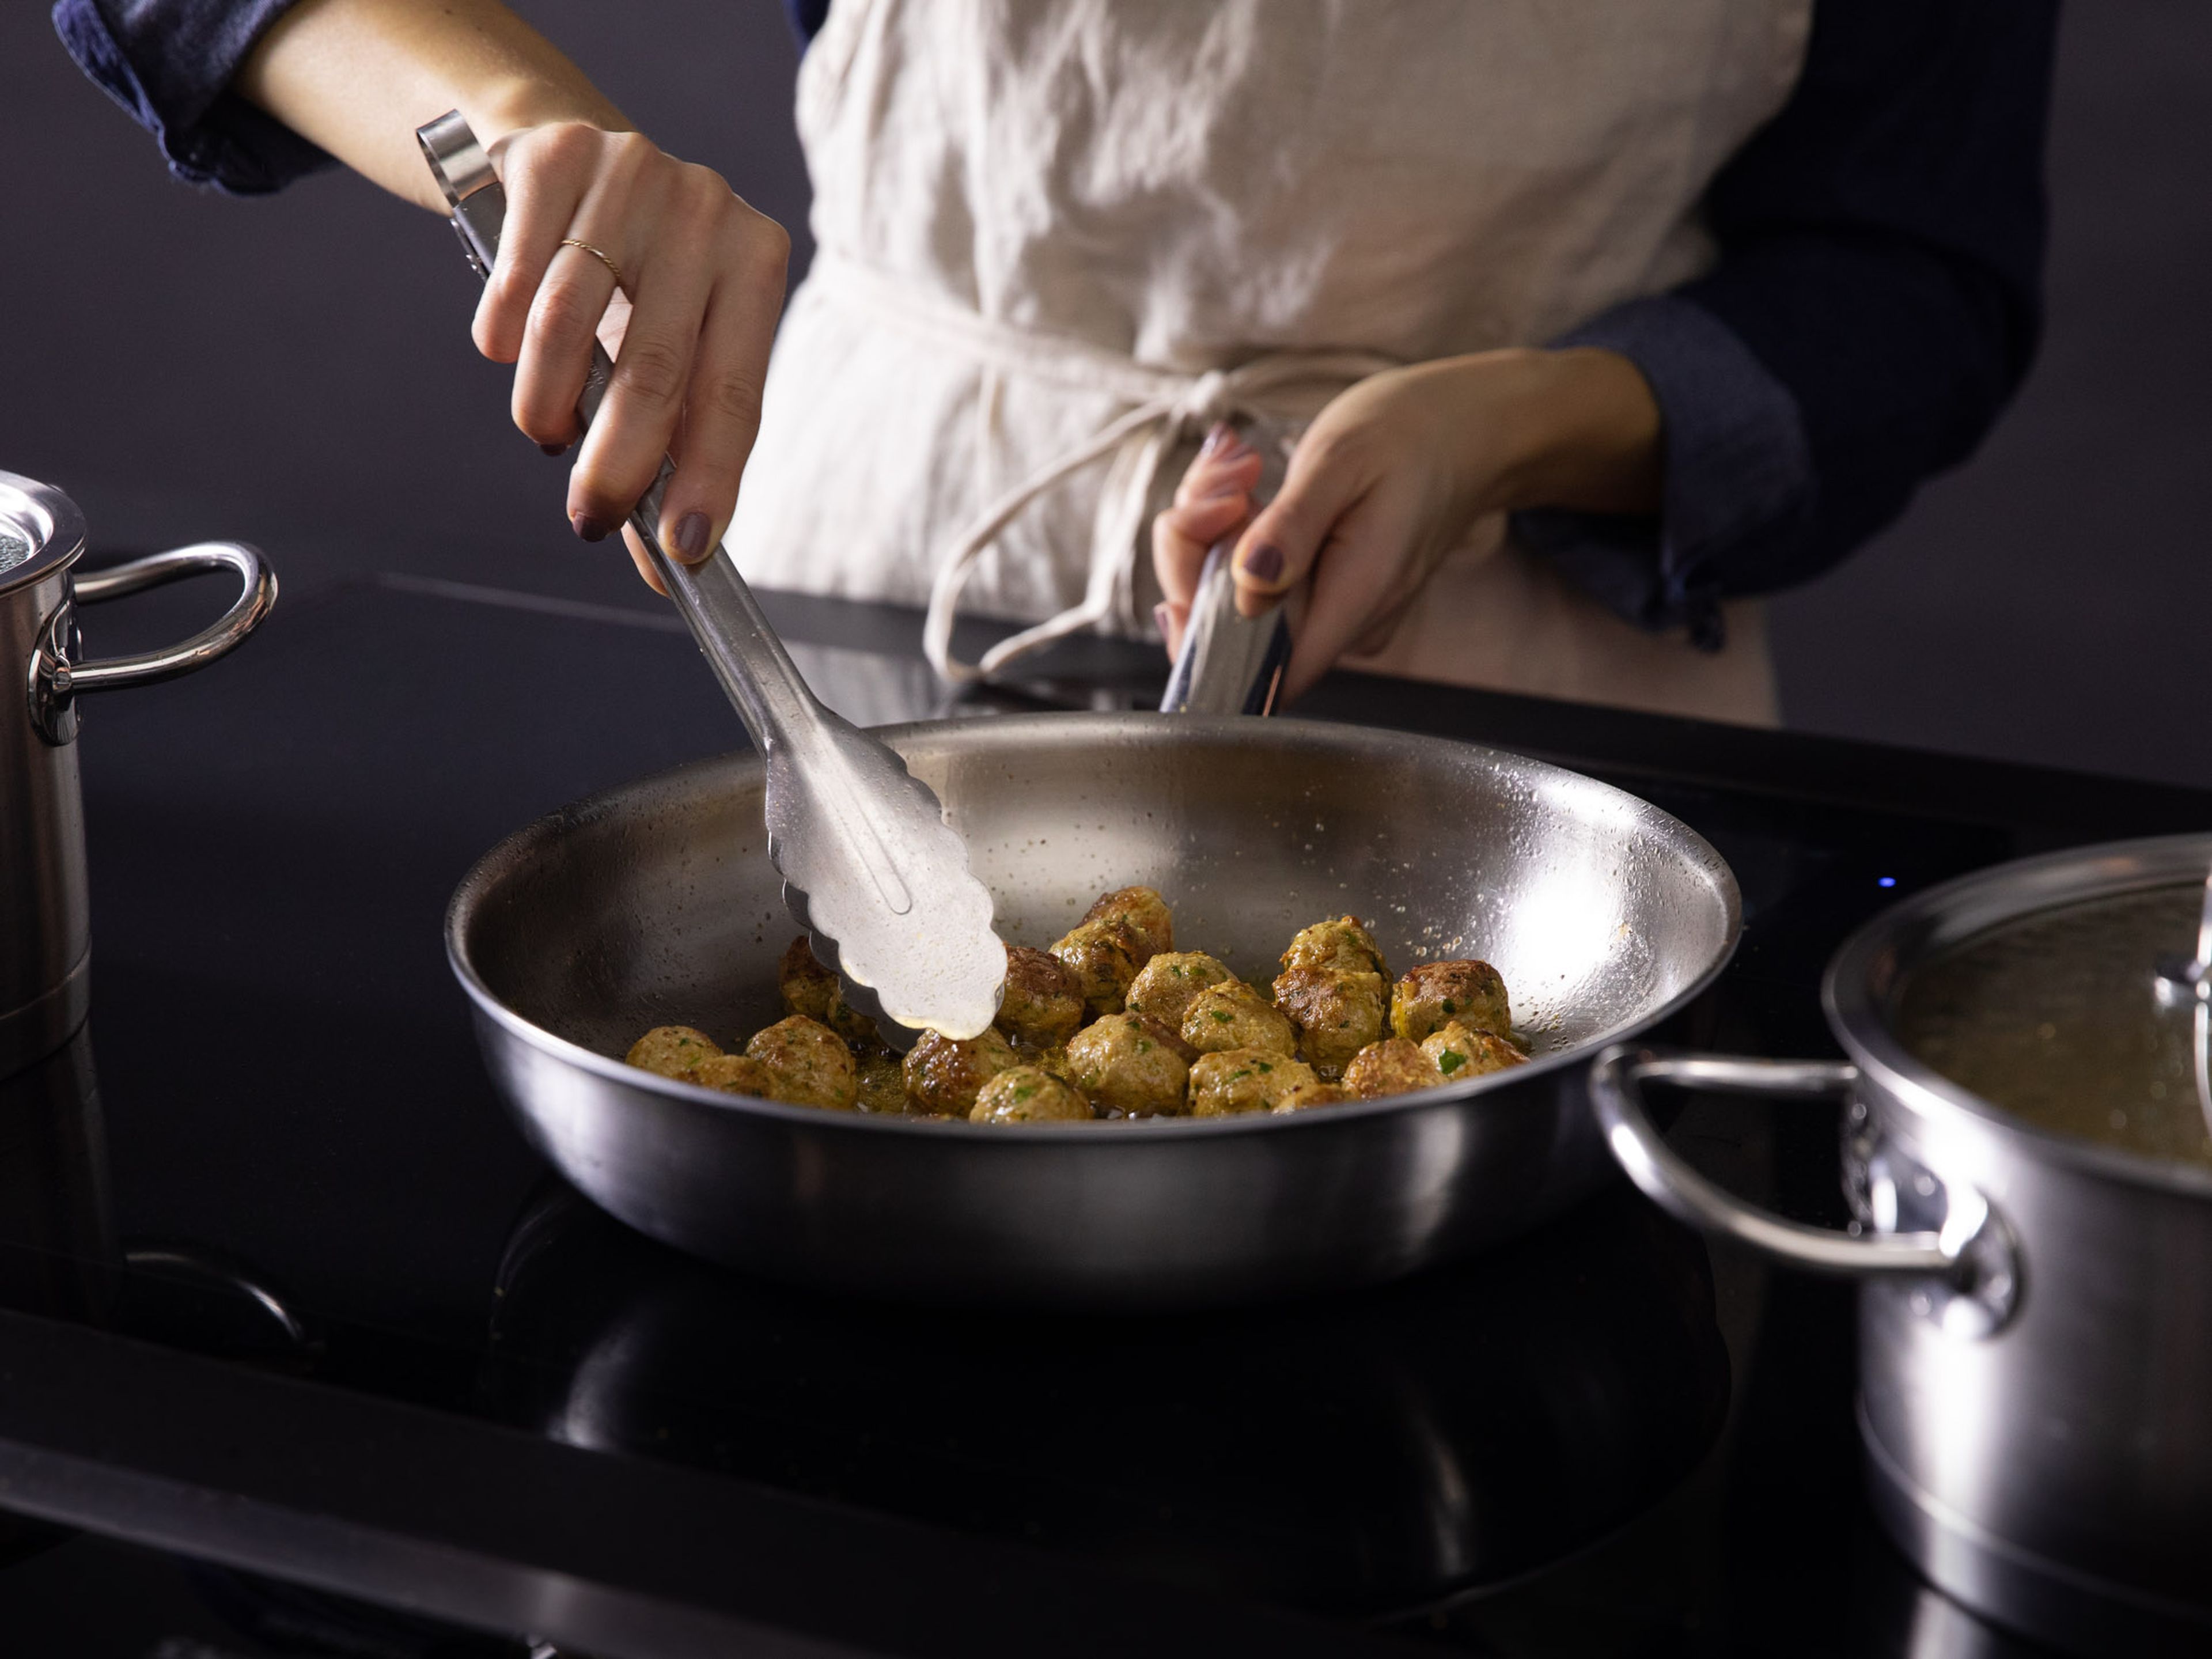 Bring a small pot of water to a simmer. Use tongs to add the meatballs one at a time and let cook just until they hold their shape and no pink shows, approx. 5 min. In a frying pan over medium heat, add some oil and fry the meatballs until brown on all sides, approx. 8 min. Remove and set aside.